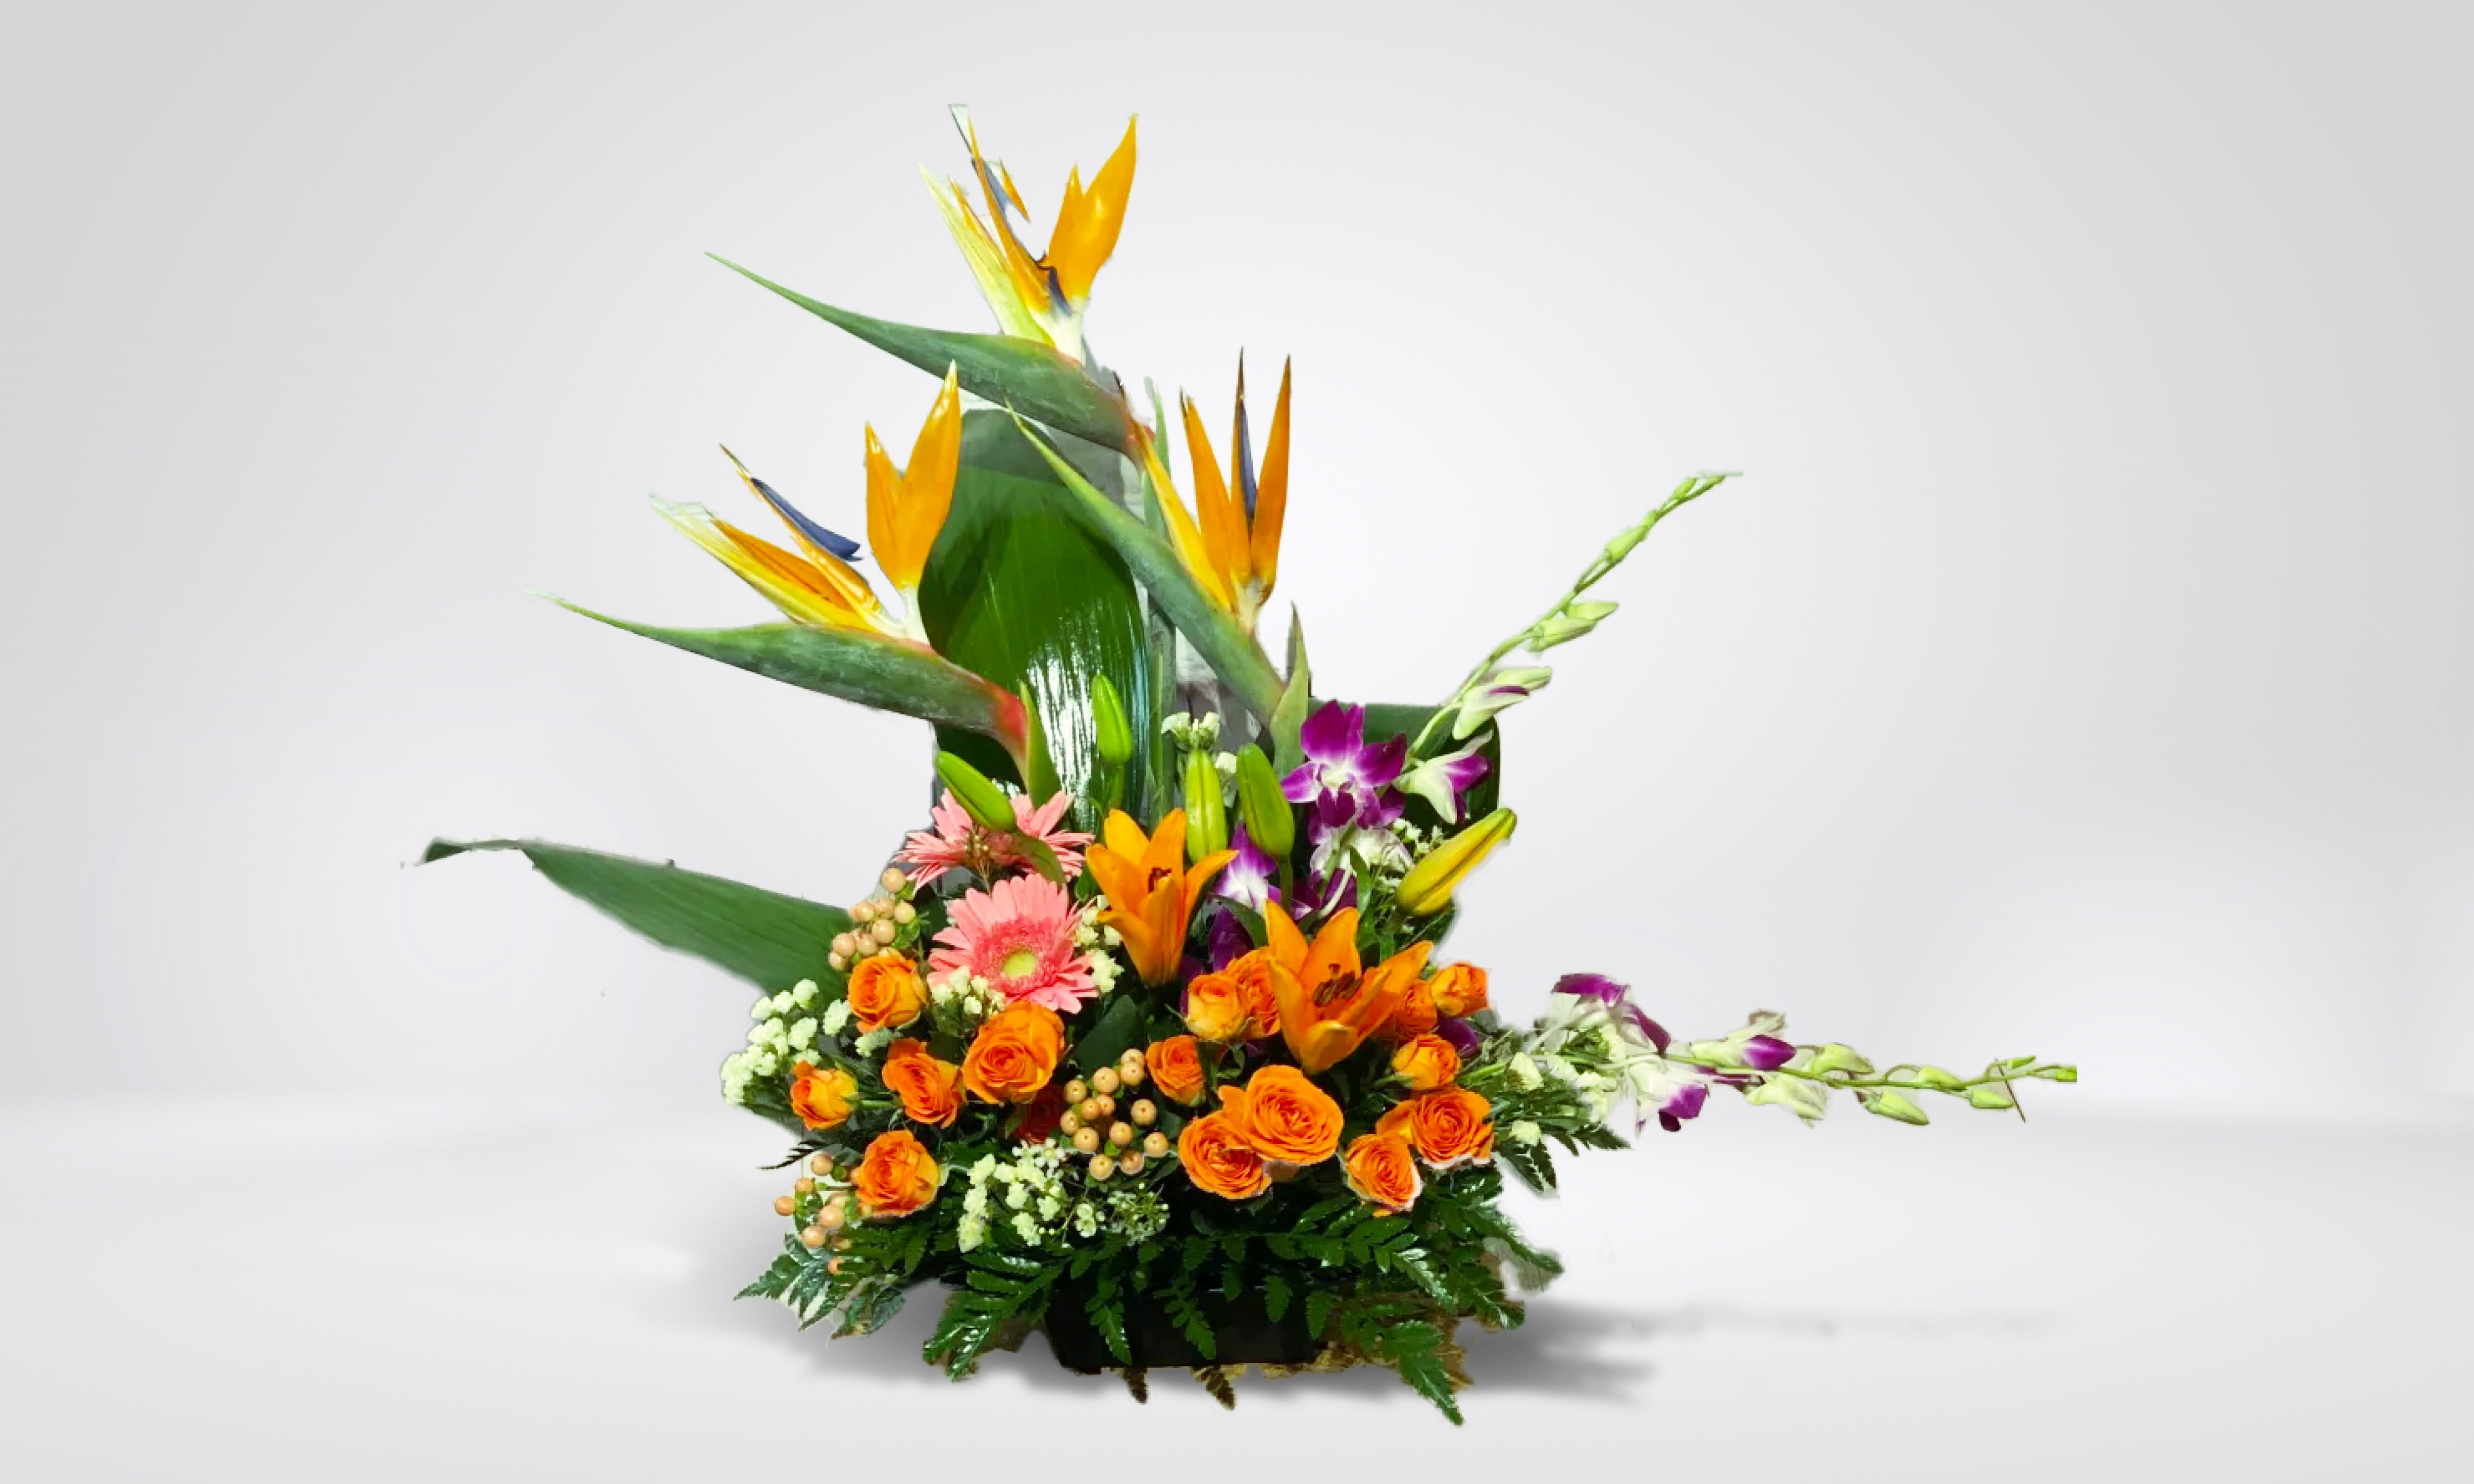 High Rise Prize - Graceful, cheerful, and wonderfully dazzling! This modern-style arrangement is a sure winner.  Stunning, tall birds of paradise stand out among lilies, spray roses, orchids, and more in this elegant display